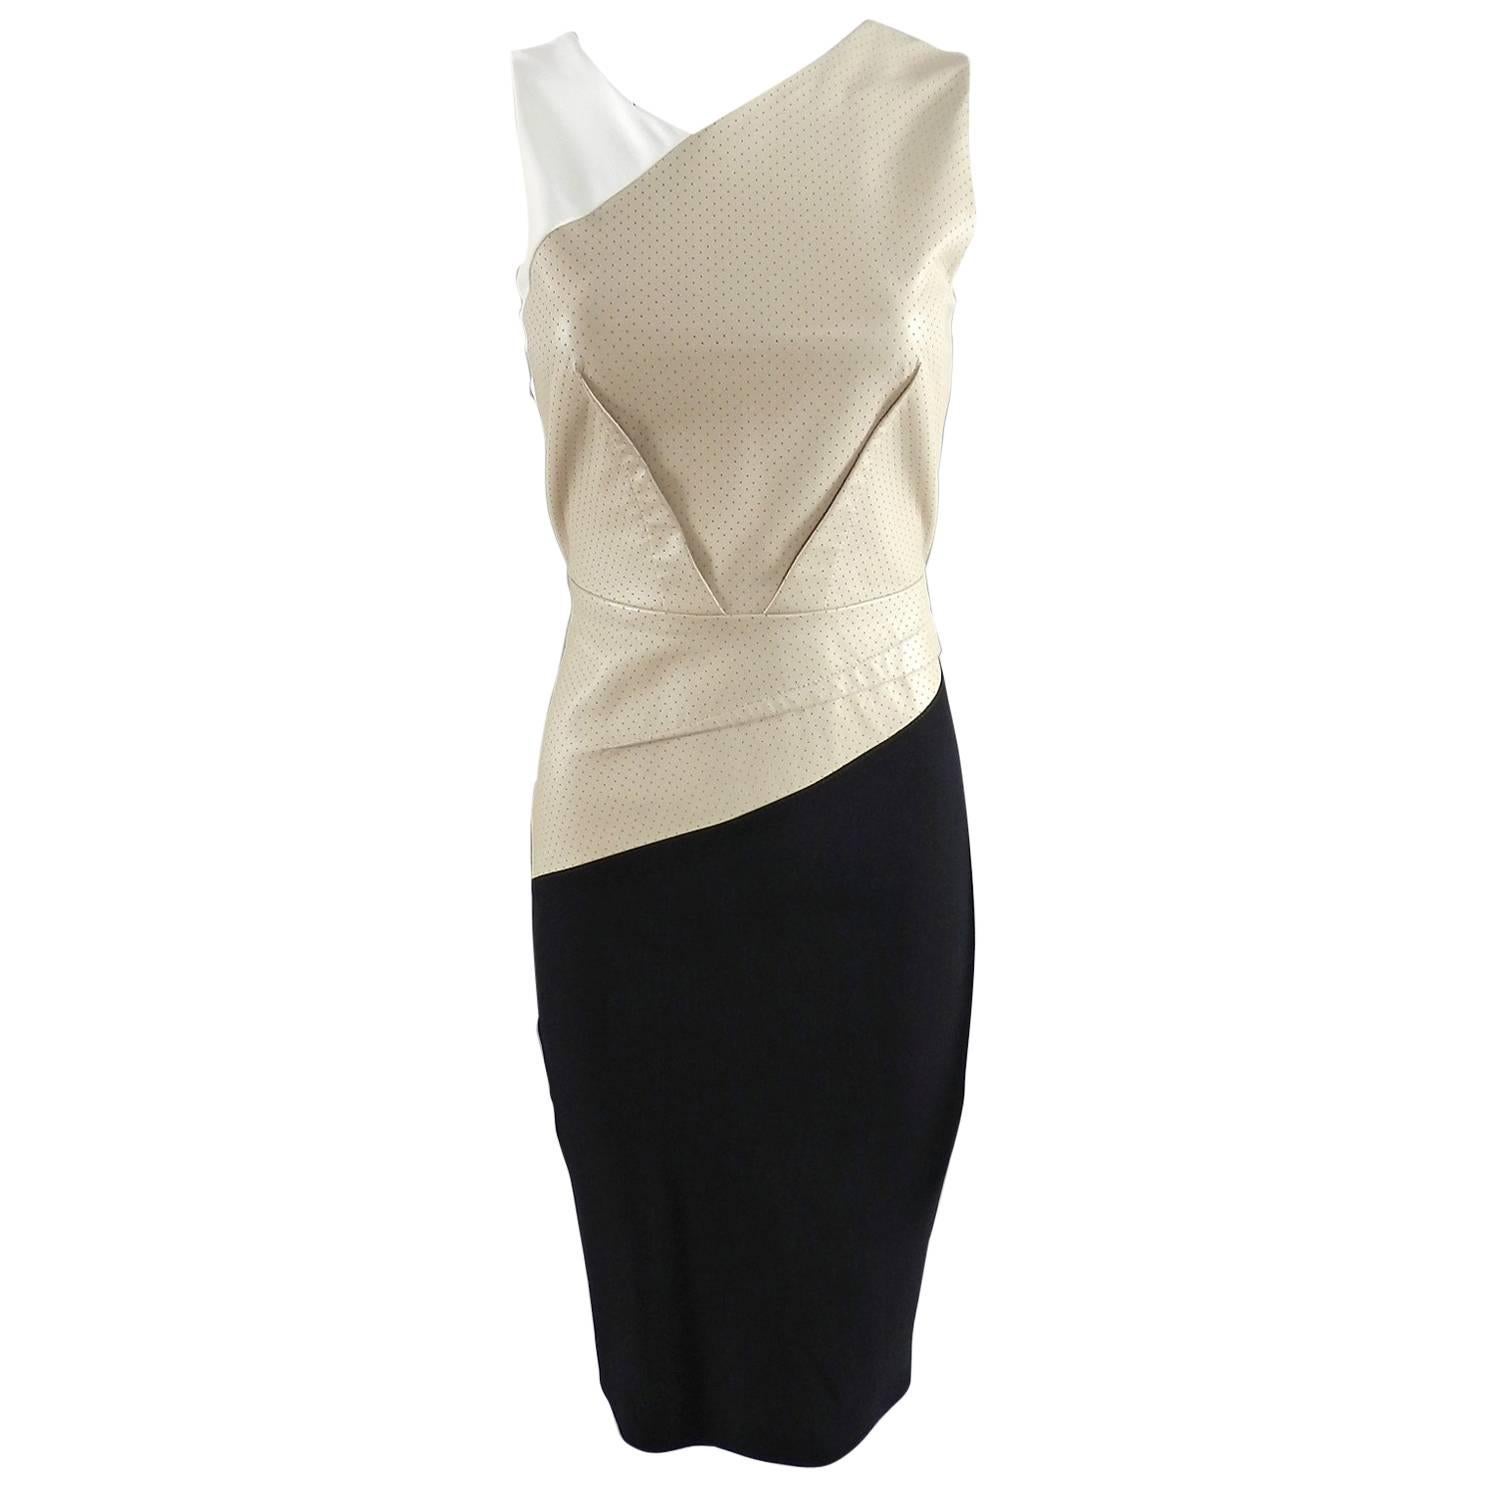 Roland Mouret Beige and Black Perforated Leather Wiggle Dress